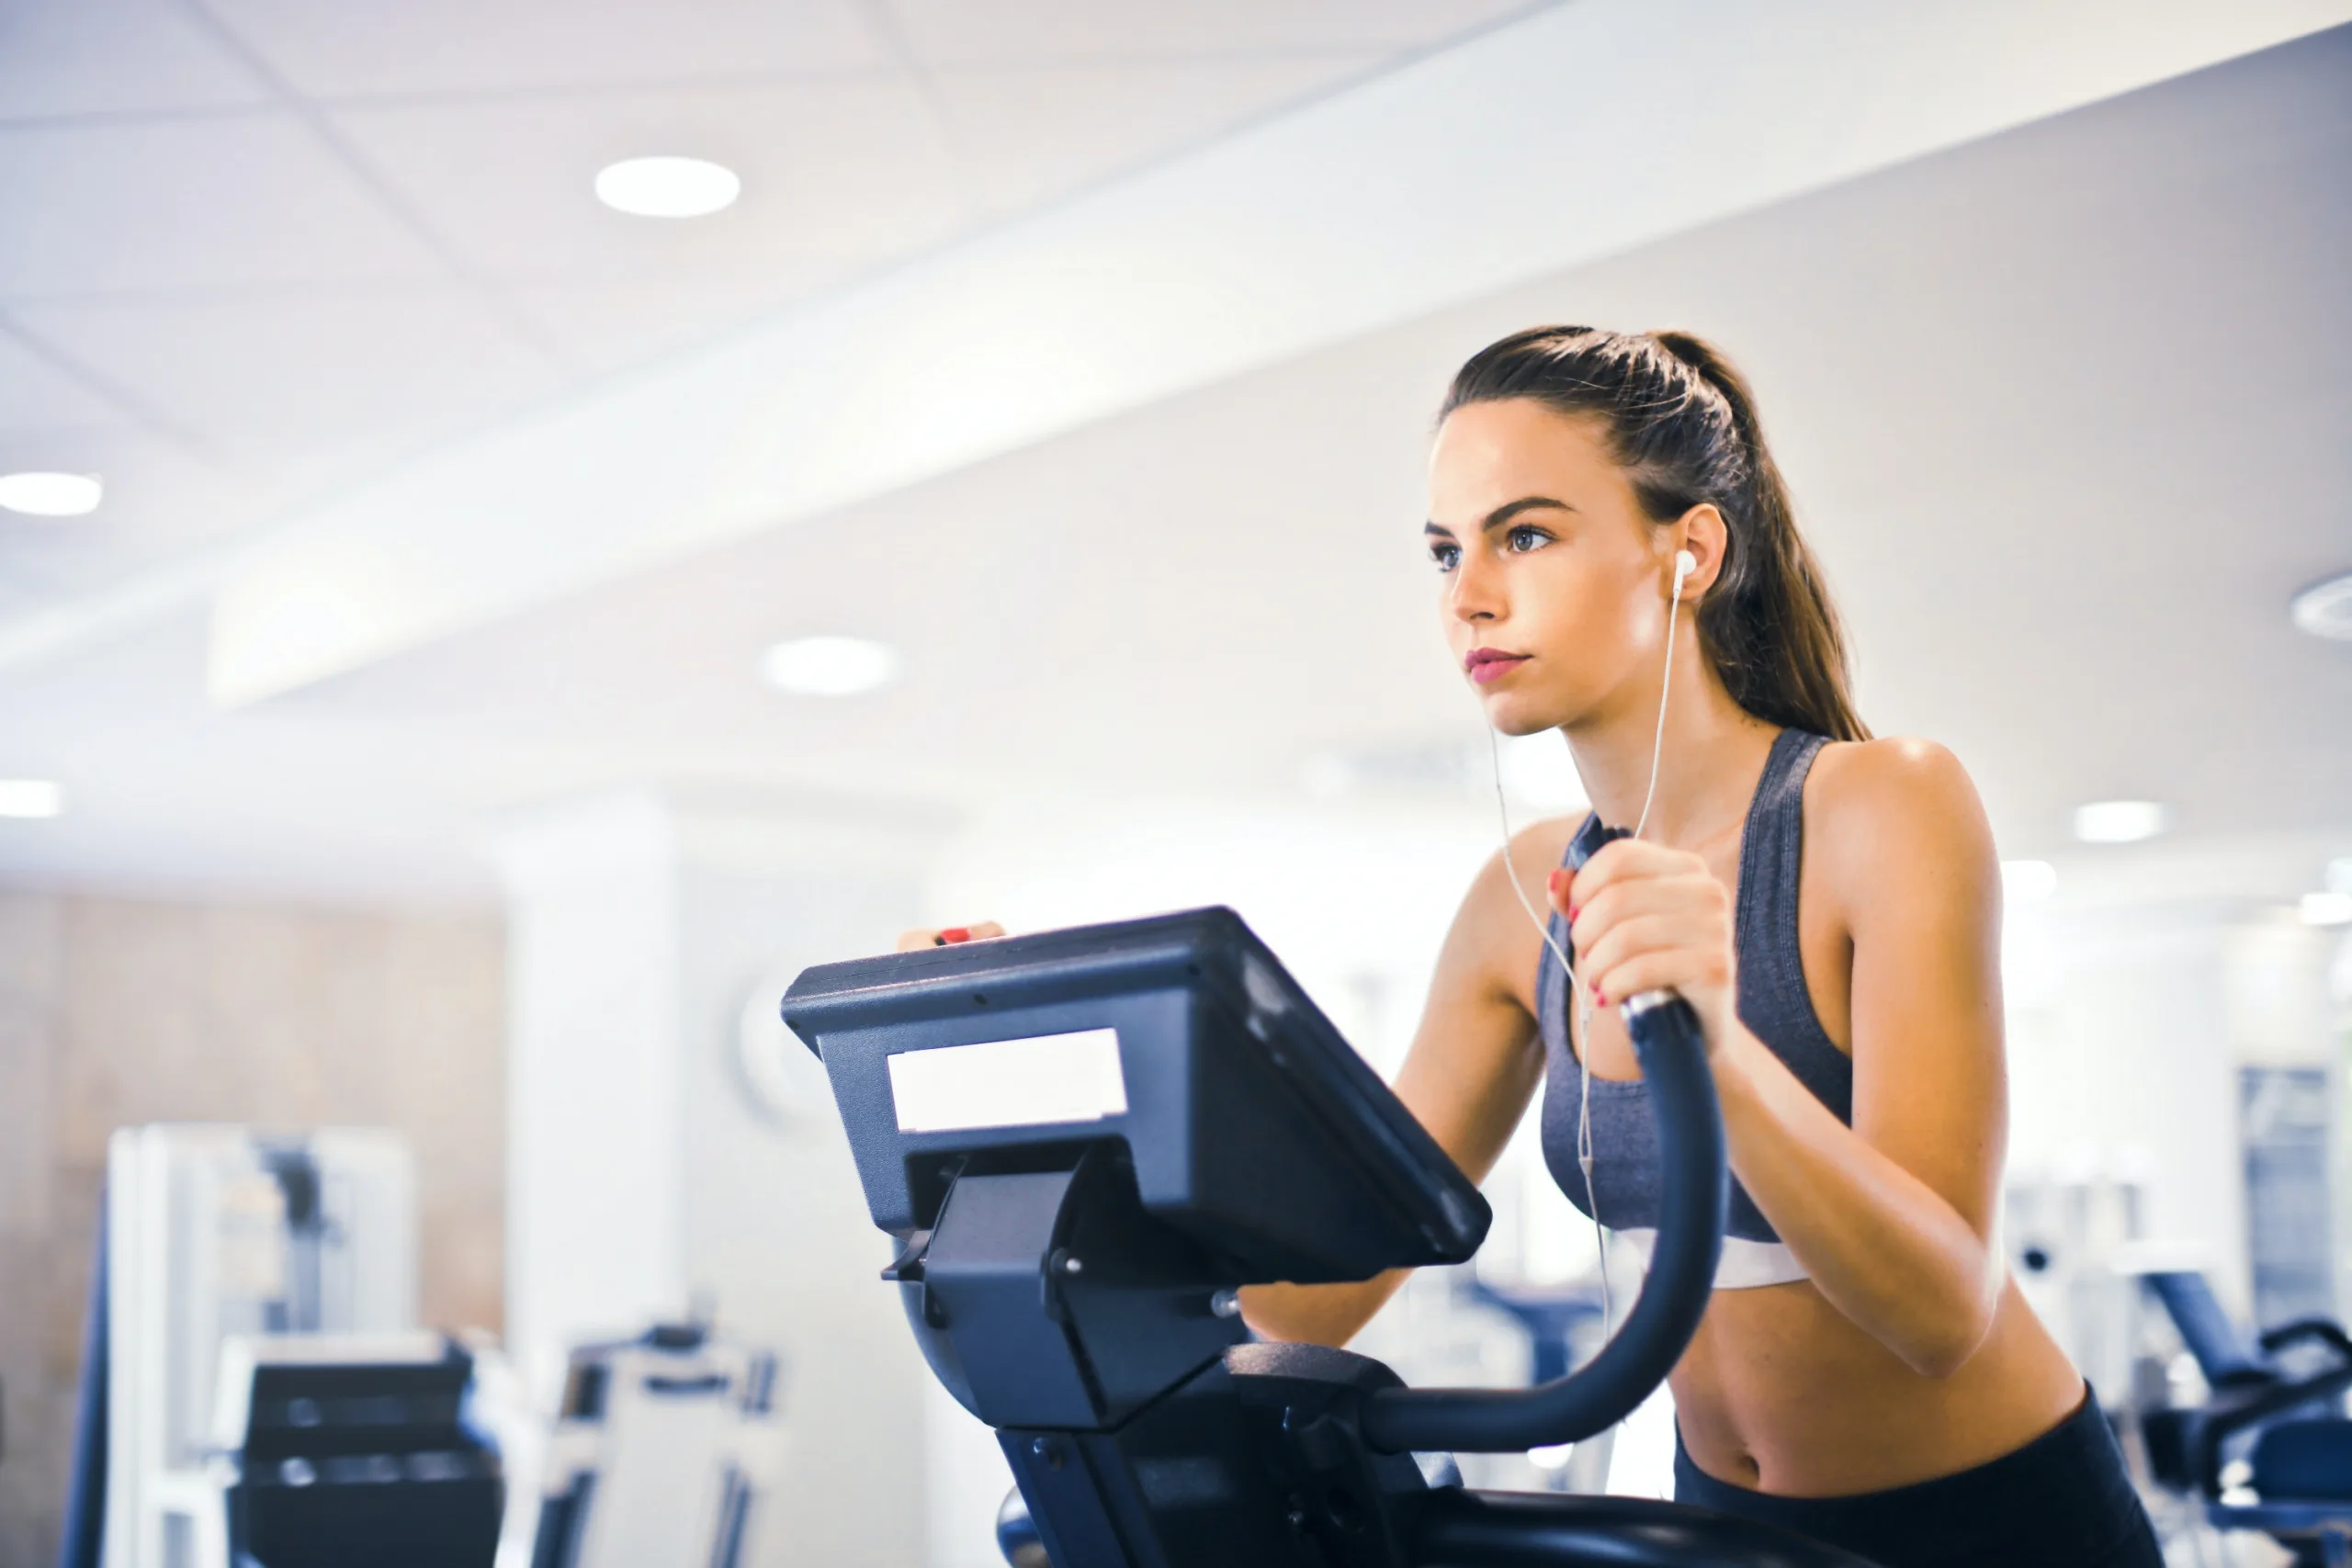 focused woman exercising in treadmill while listening to music